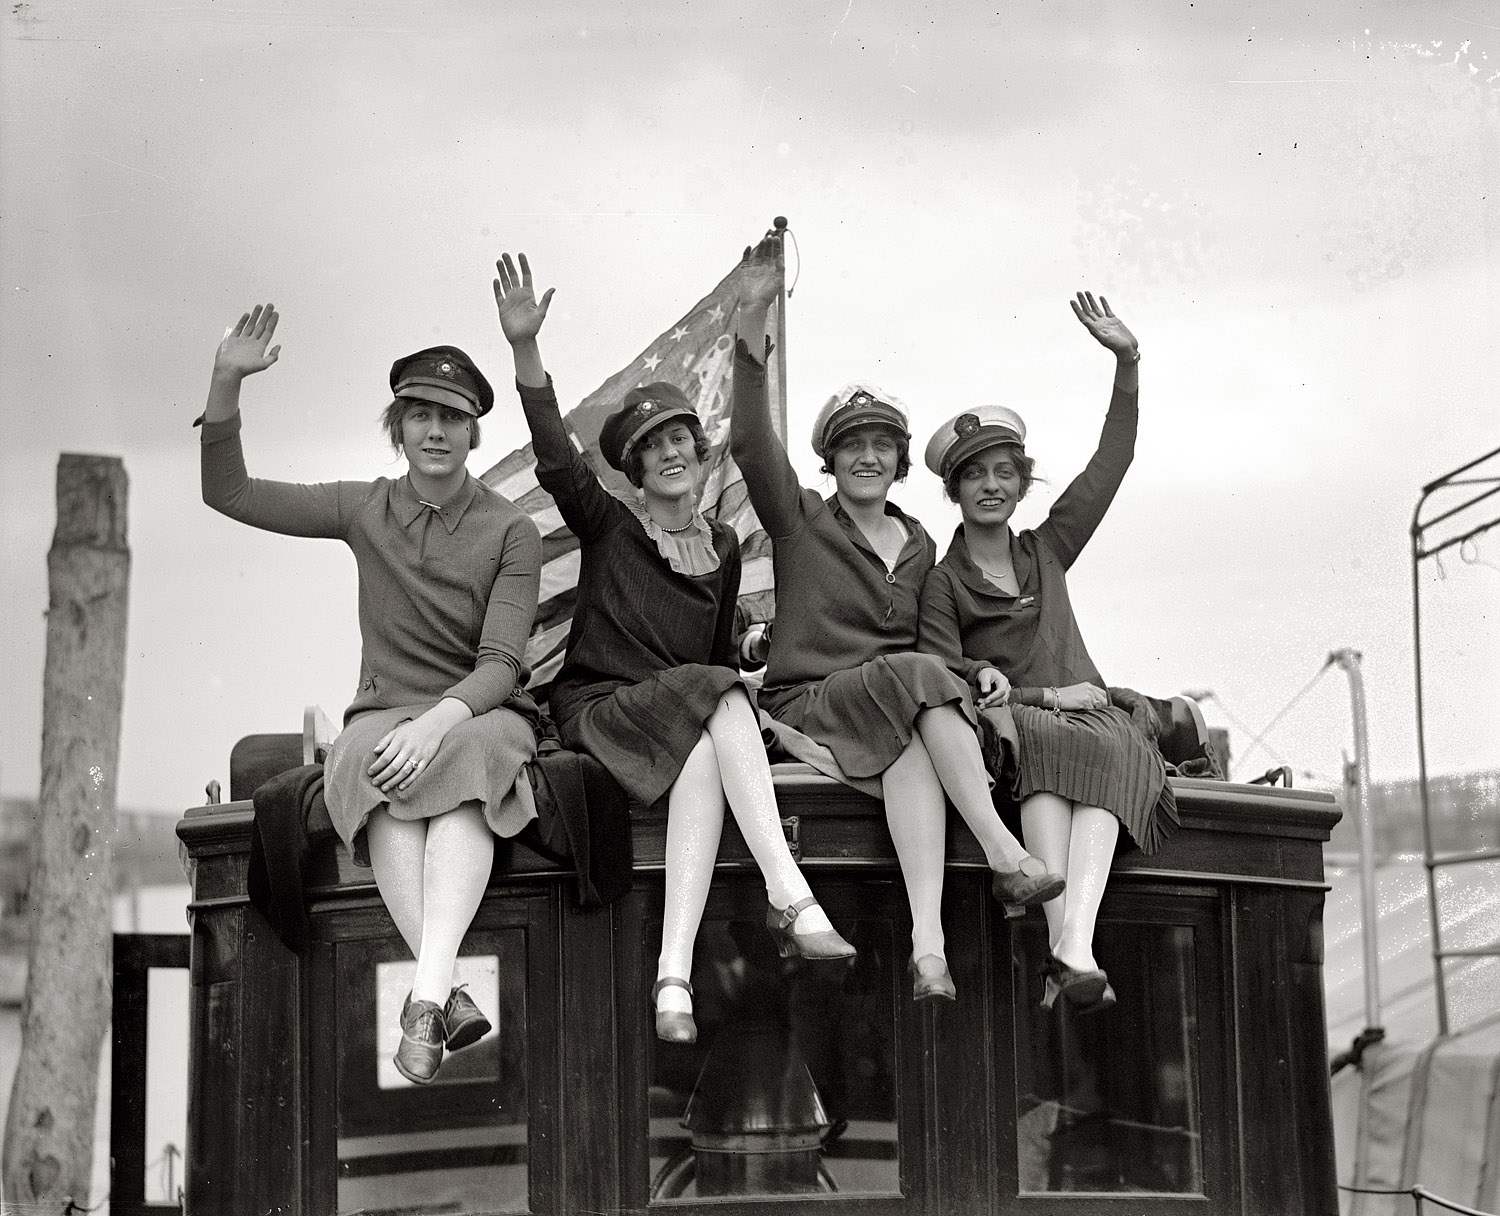 March 23, 1927. Our second look at Sally Phillips, Fanny Dial, Frances Gore and Georgiana Joyes somewhere on the Potomac. View full size. National Photo.